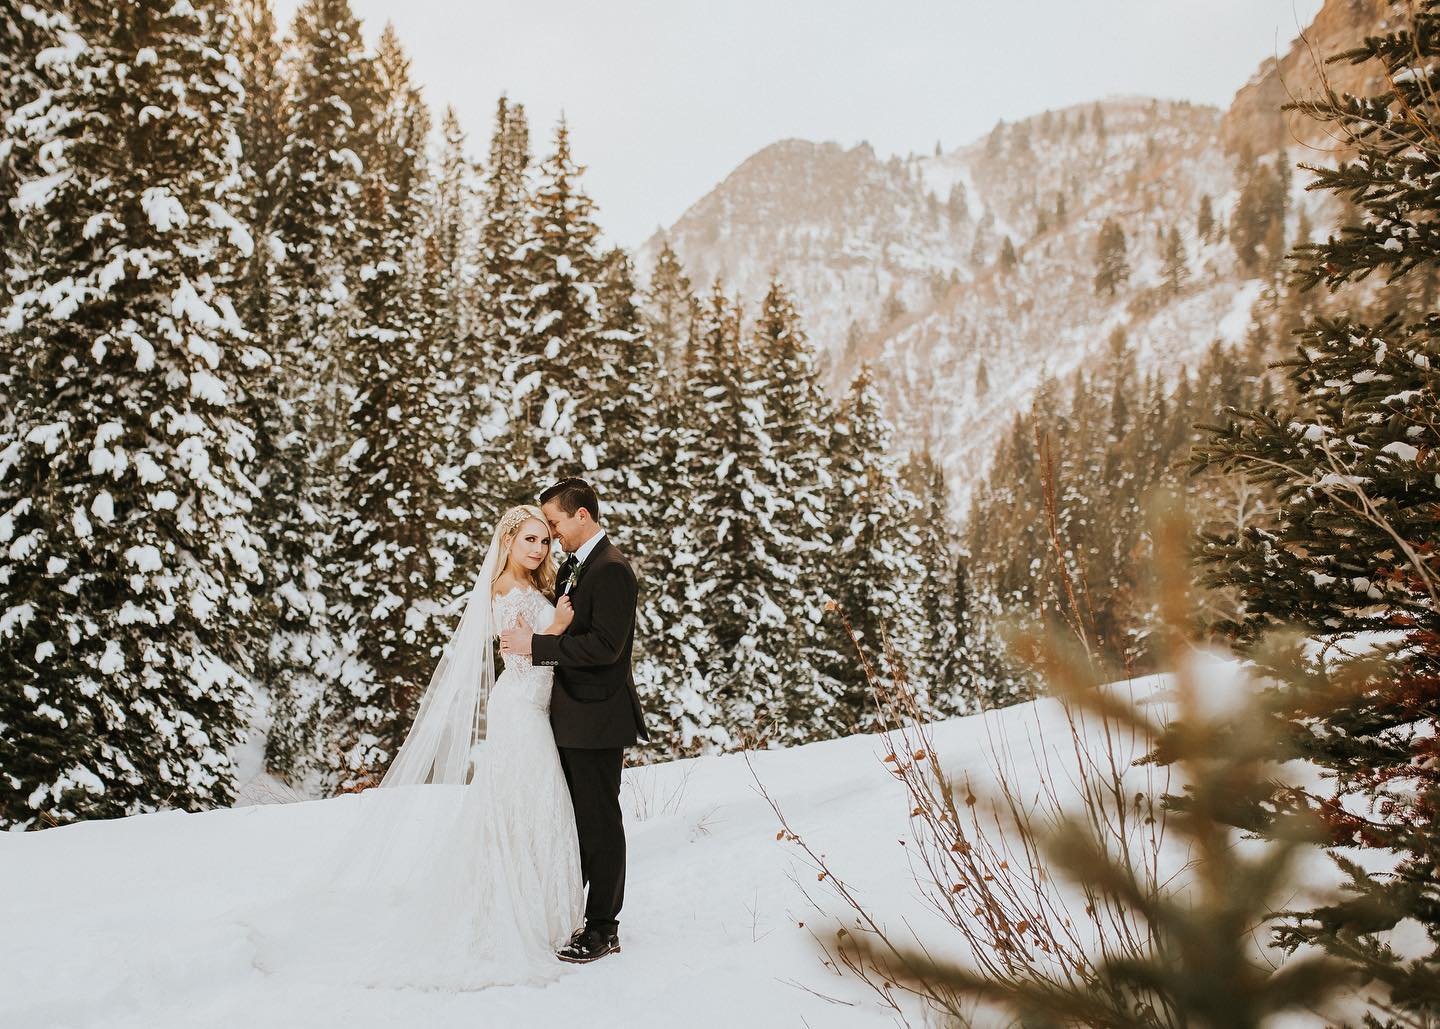 I don&rsquo;t want to jinx it, but I&rsquo;m really hoping the snow is done for the year. As pretty as it can be, I like it a lot more in photos than I do in real life.
.
.
.
.
.
.
.
.
.
.
.
.
.
#utahphotographer #weddingphotography #saltlakecity #po